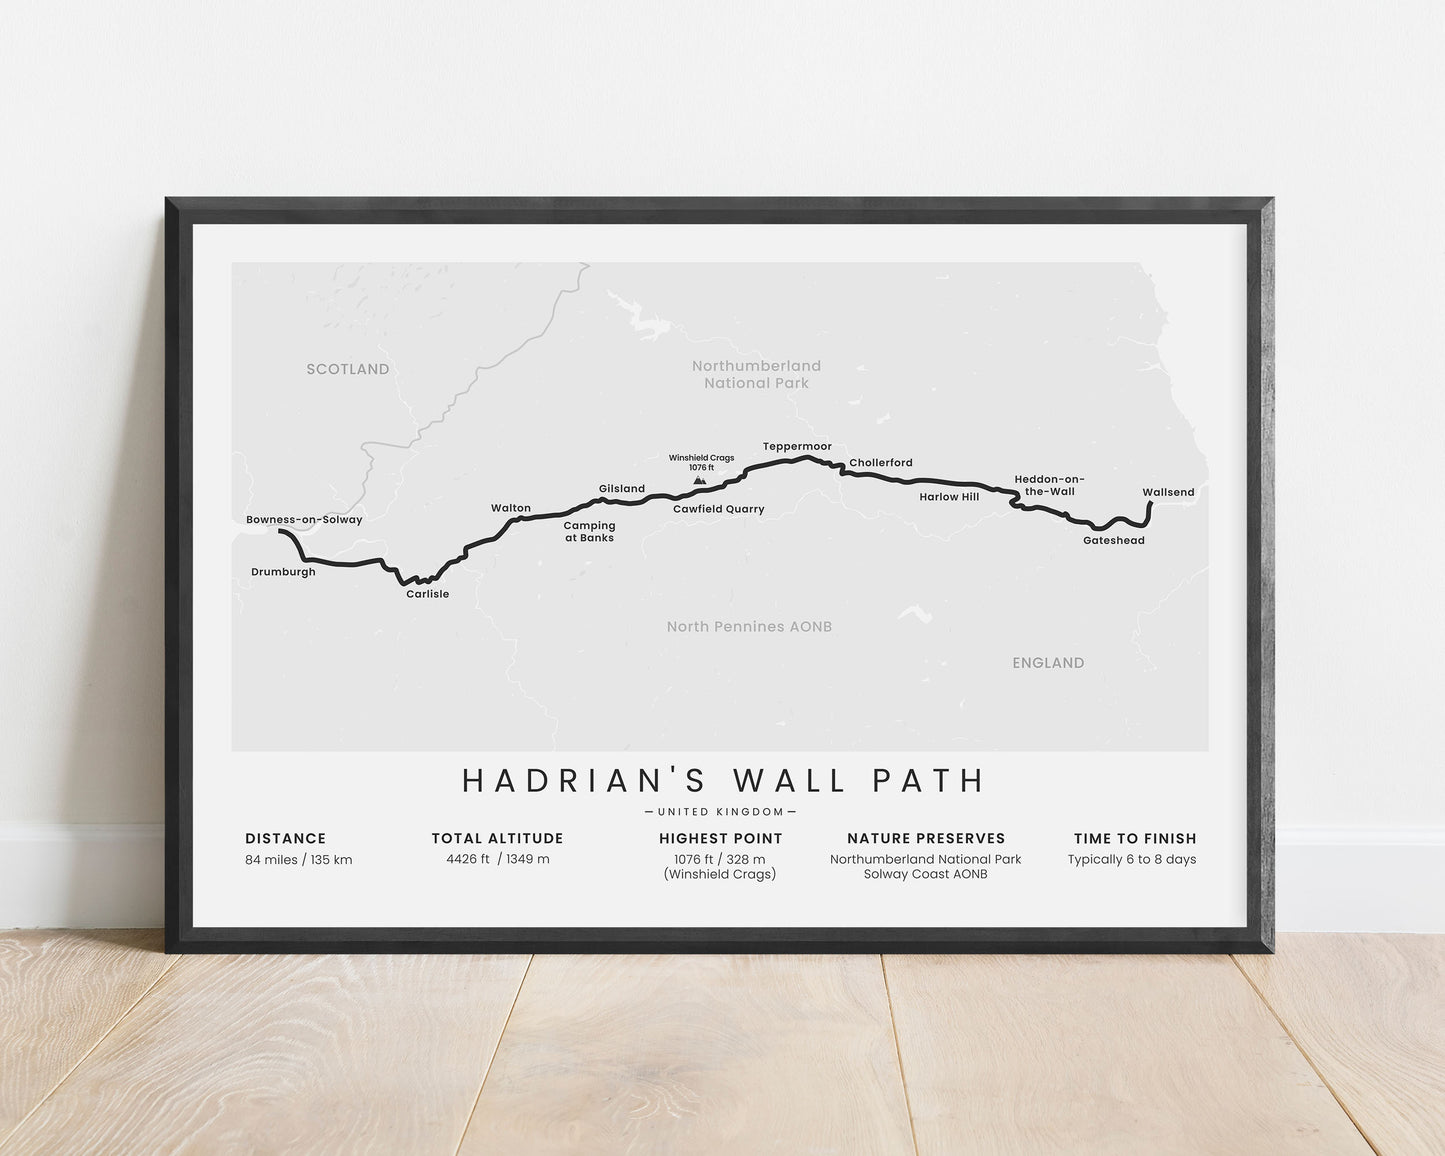 Hadrian's Wall Path National Trail (England) trail poster with white background